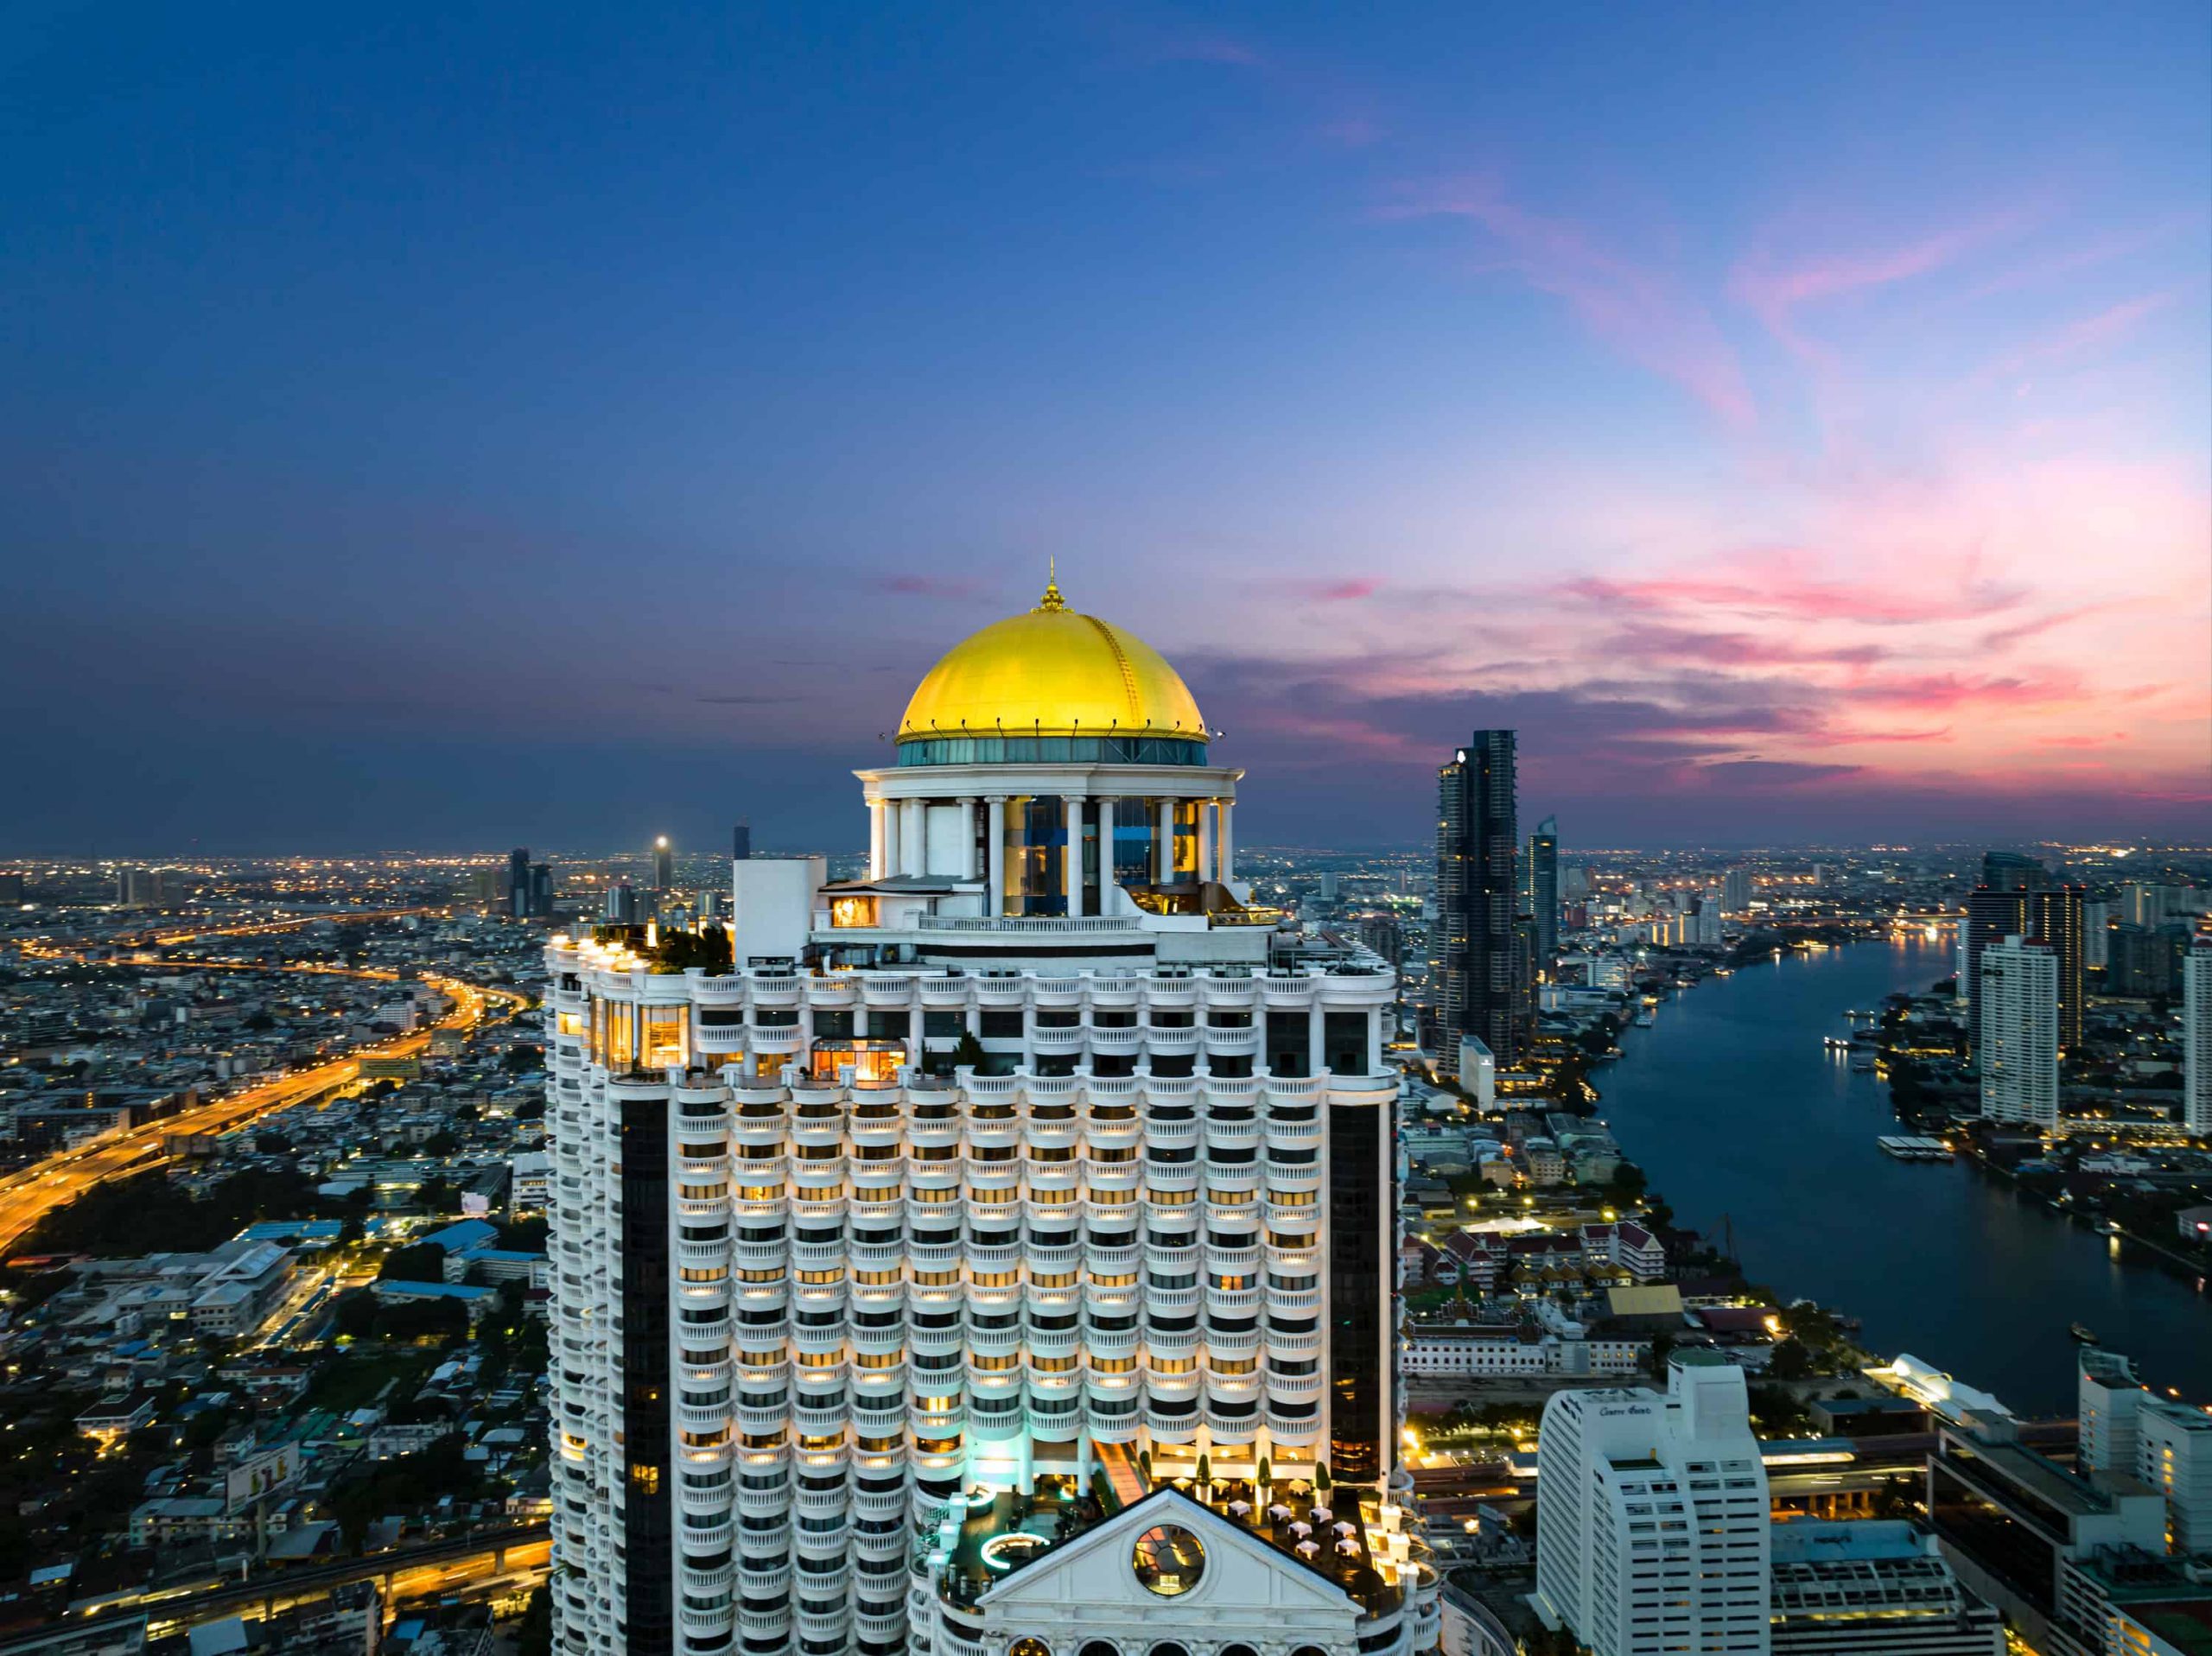 lebua at State Tower The Best 5 Star Luxury Hotel in Bangkok, Thailand